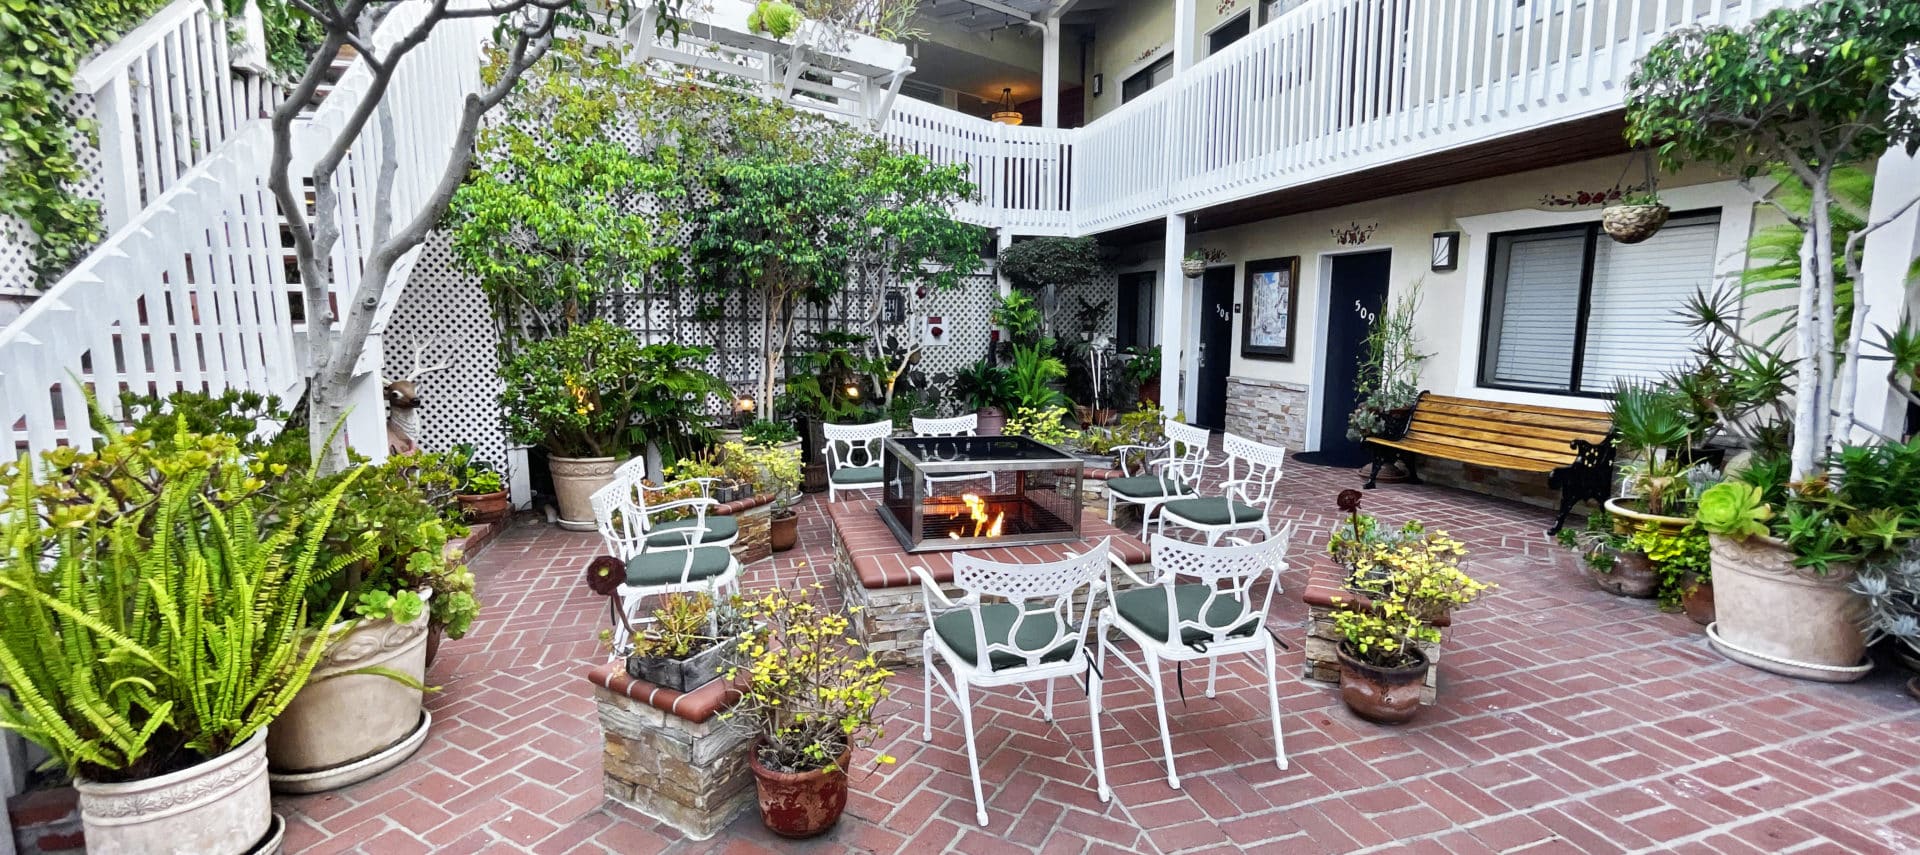 Courtyard patio with red brick and white chairs around a stone fire pit with greenery